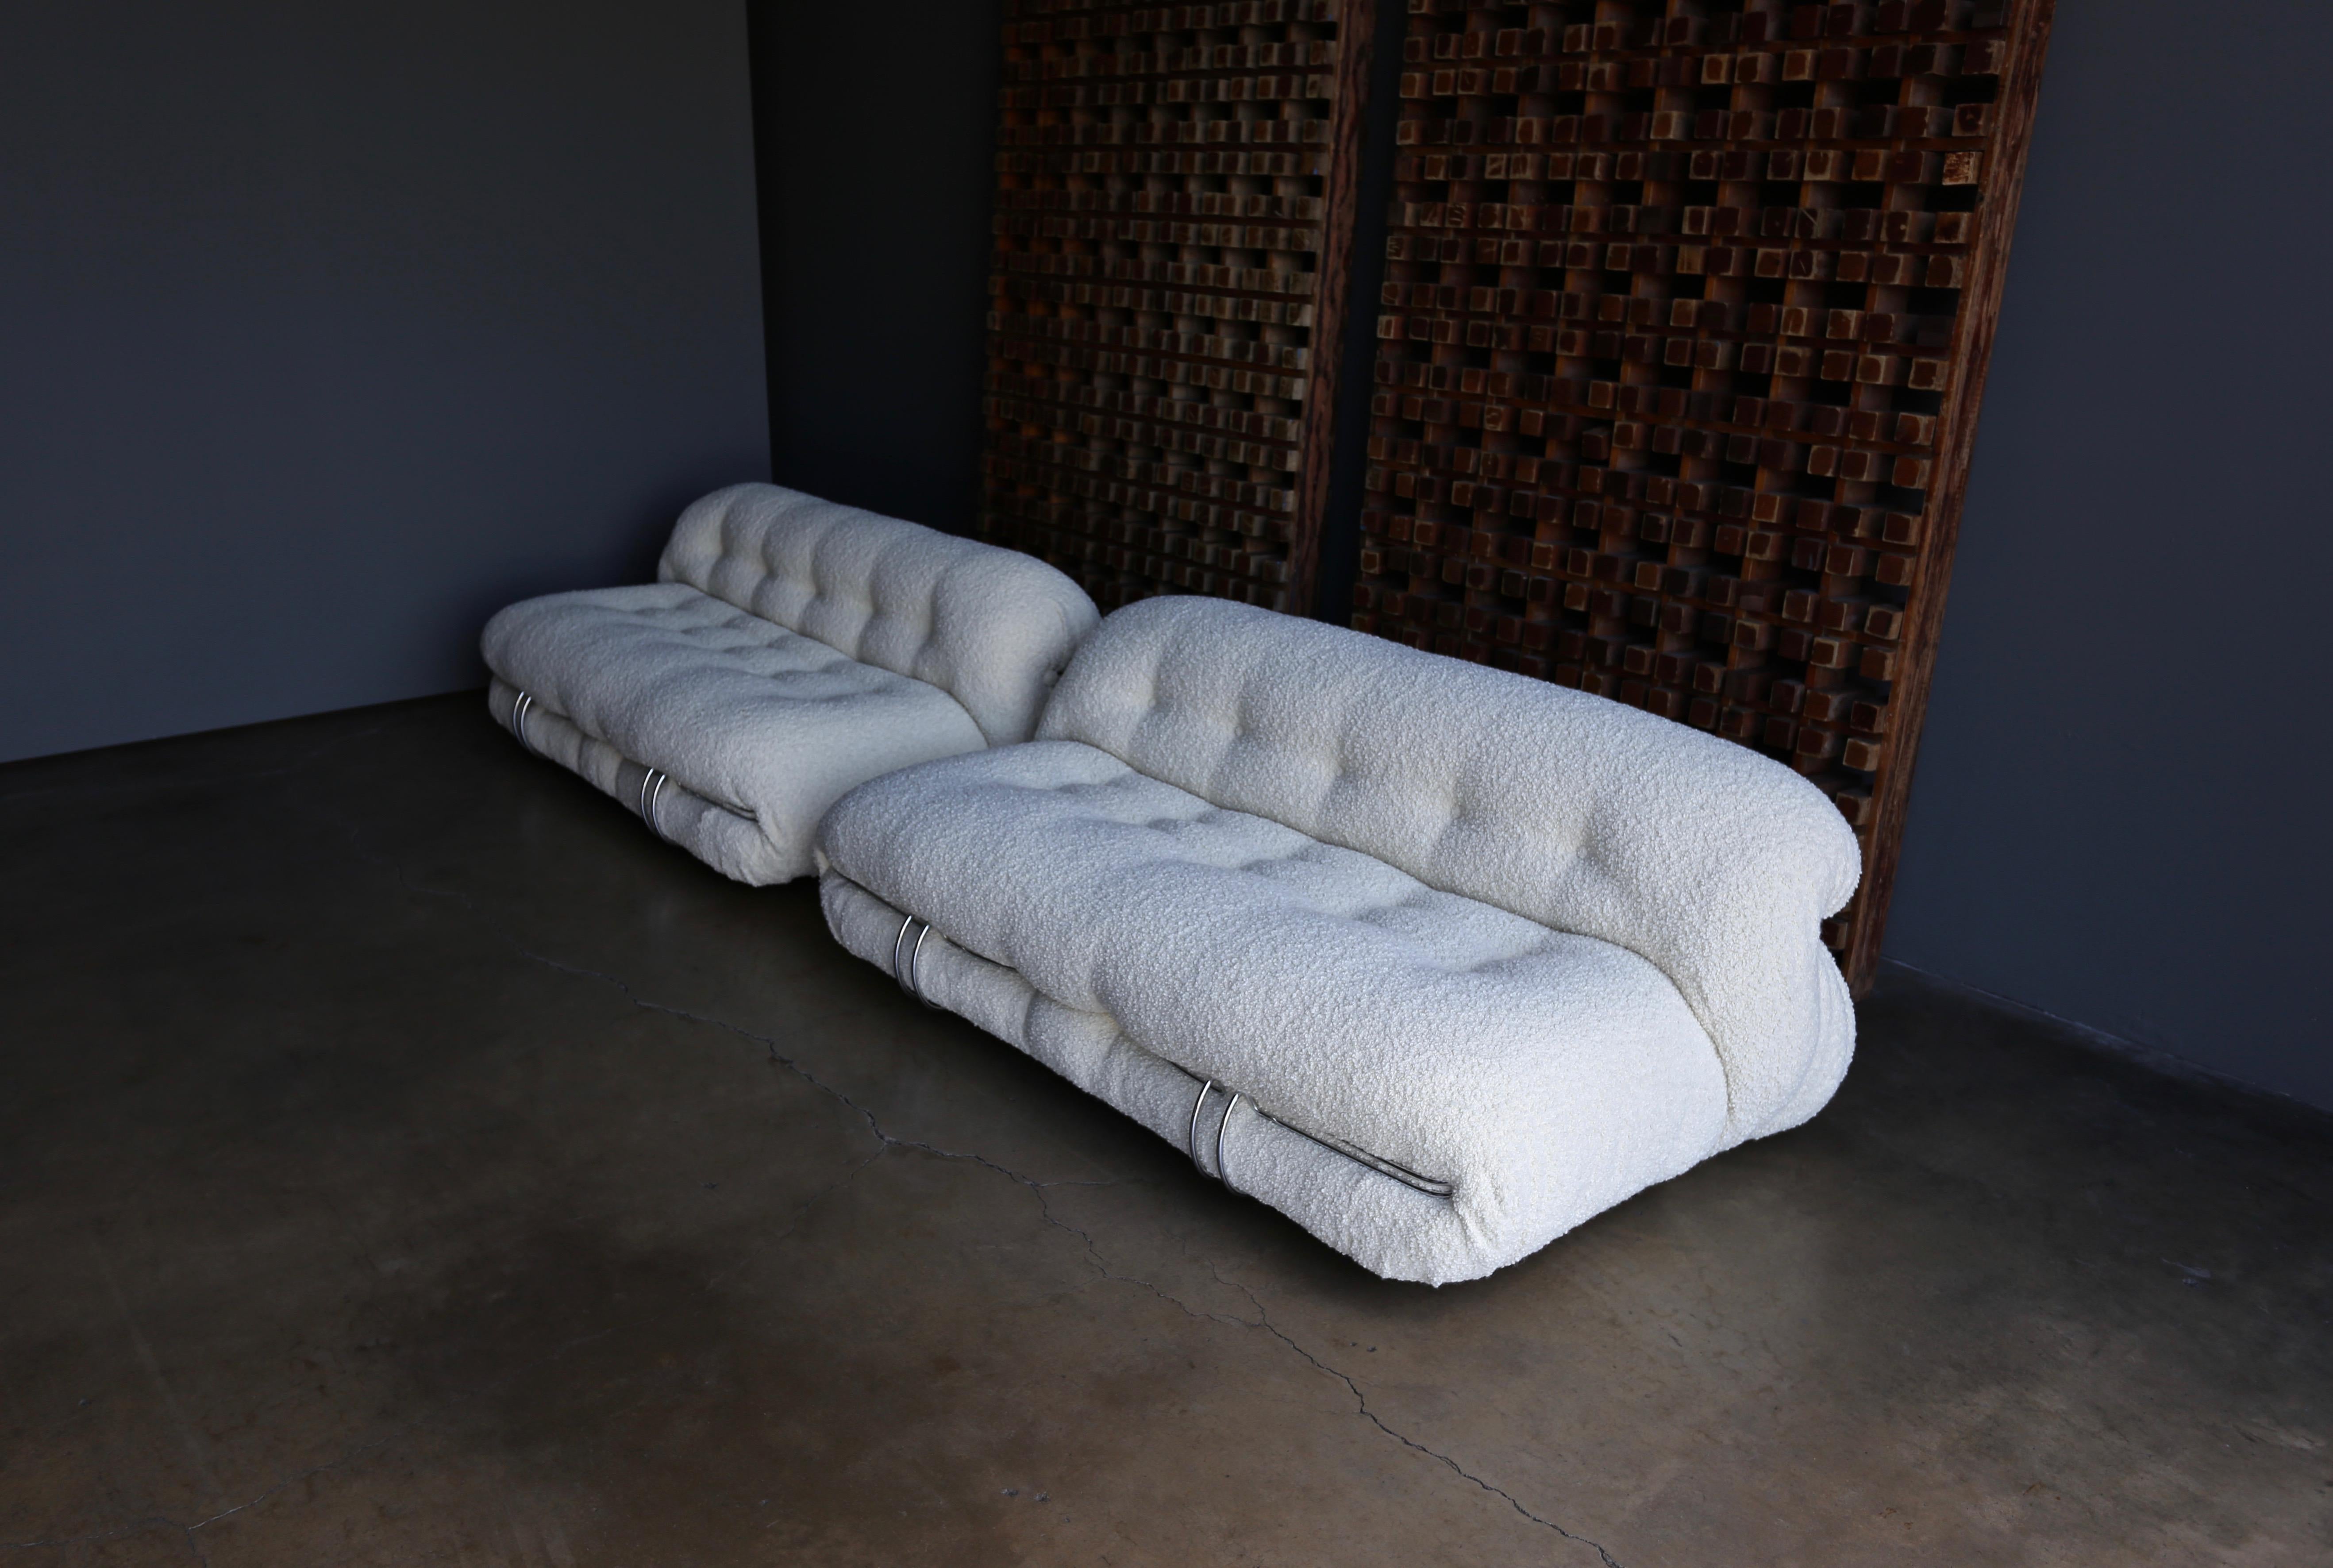 Afra & Tobia Scarpa Soriana Settee's for Cassina in Bouclé, circa 1975. This pair has been expertly upholstered in alpaca bouclé.